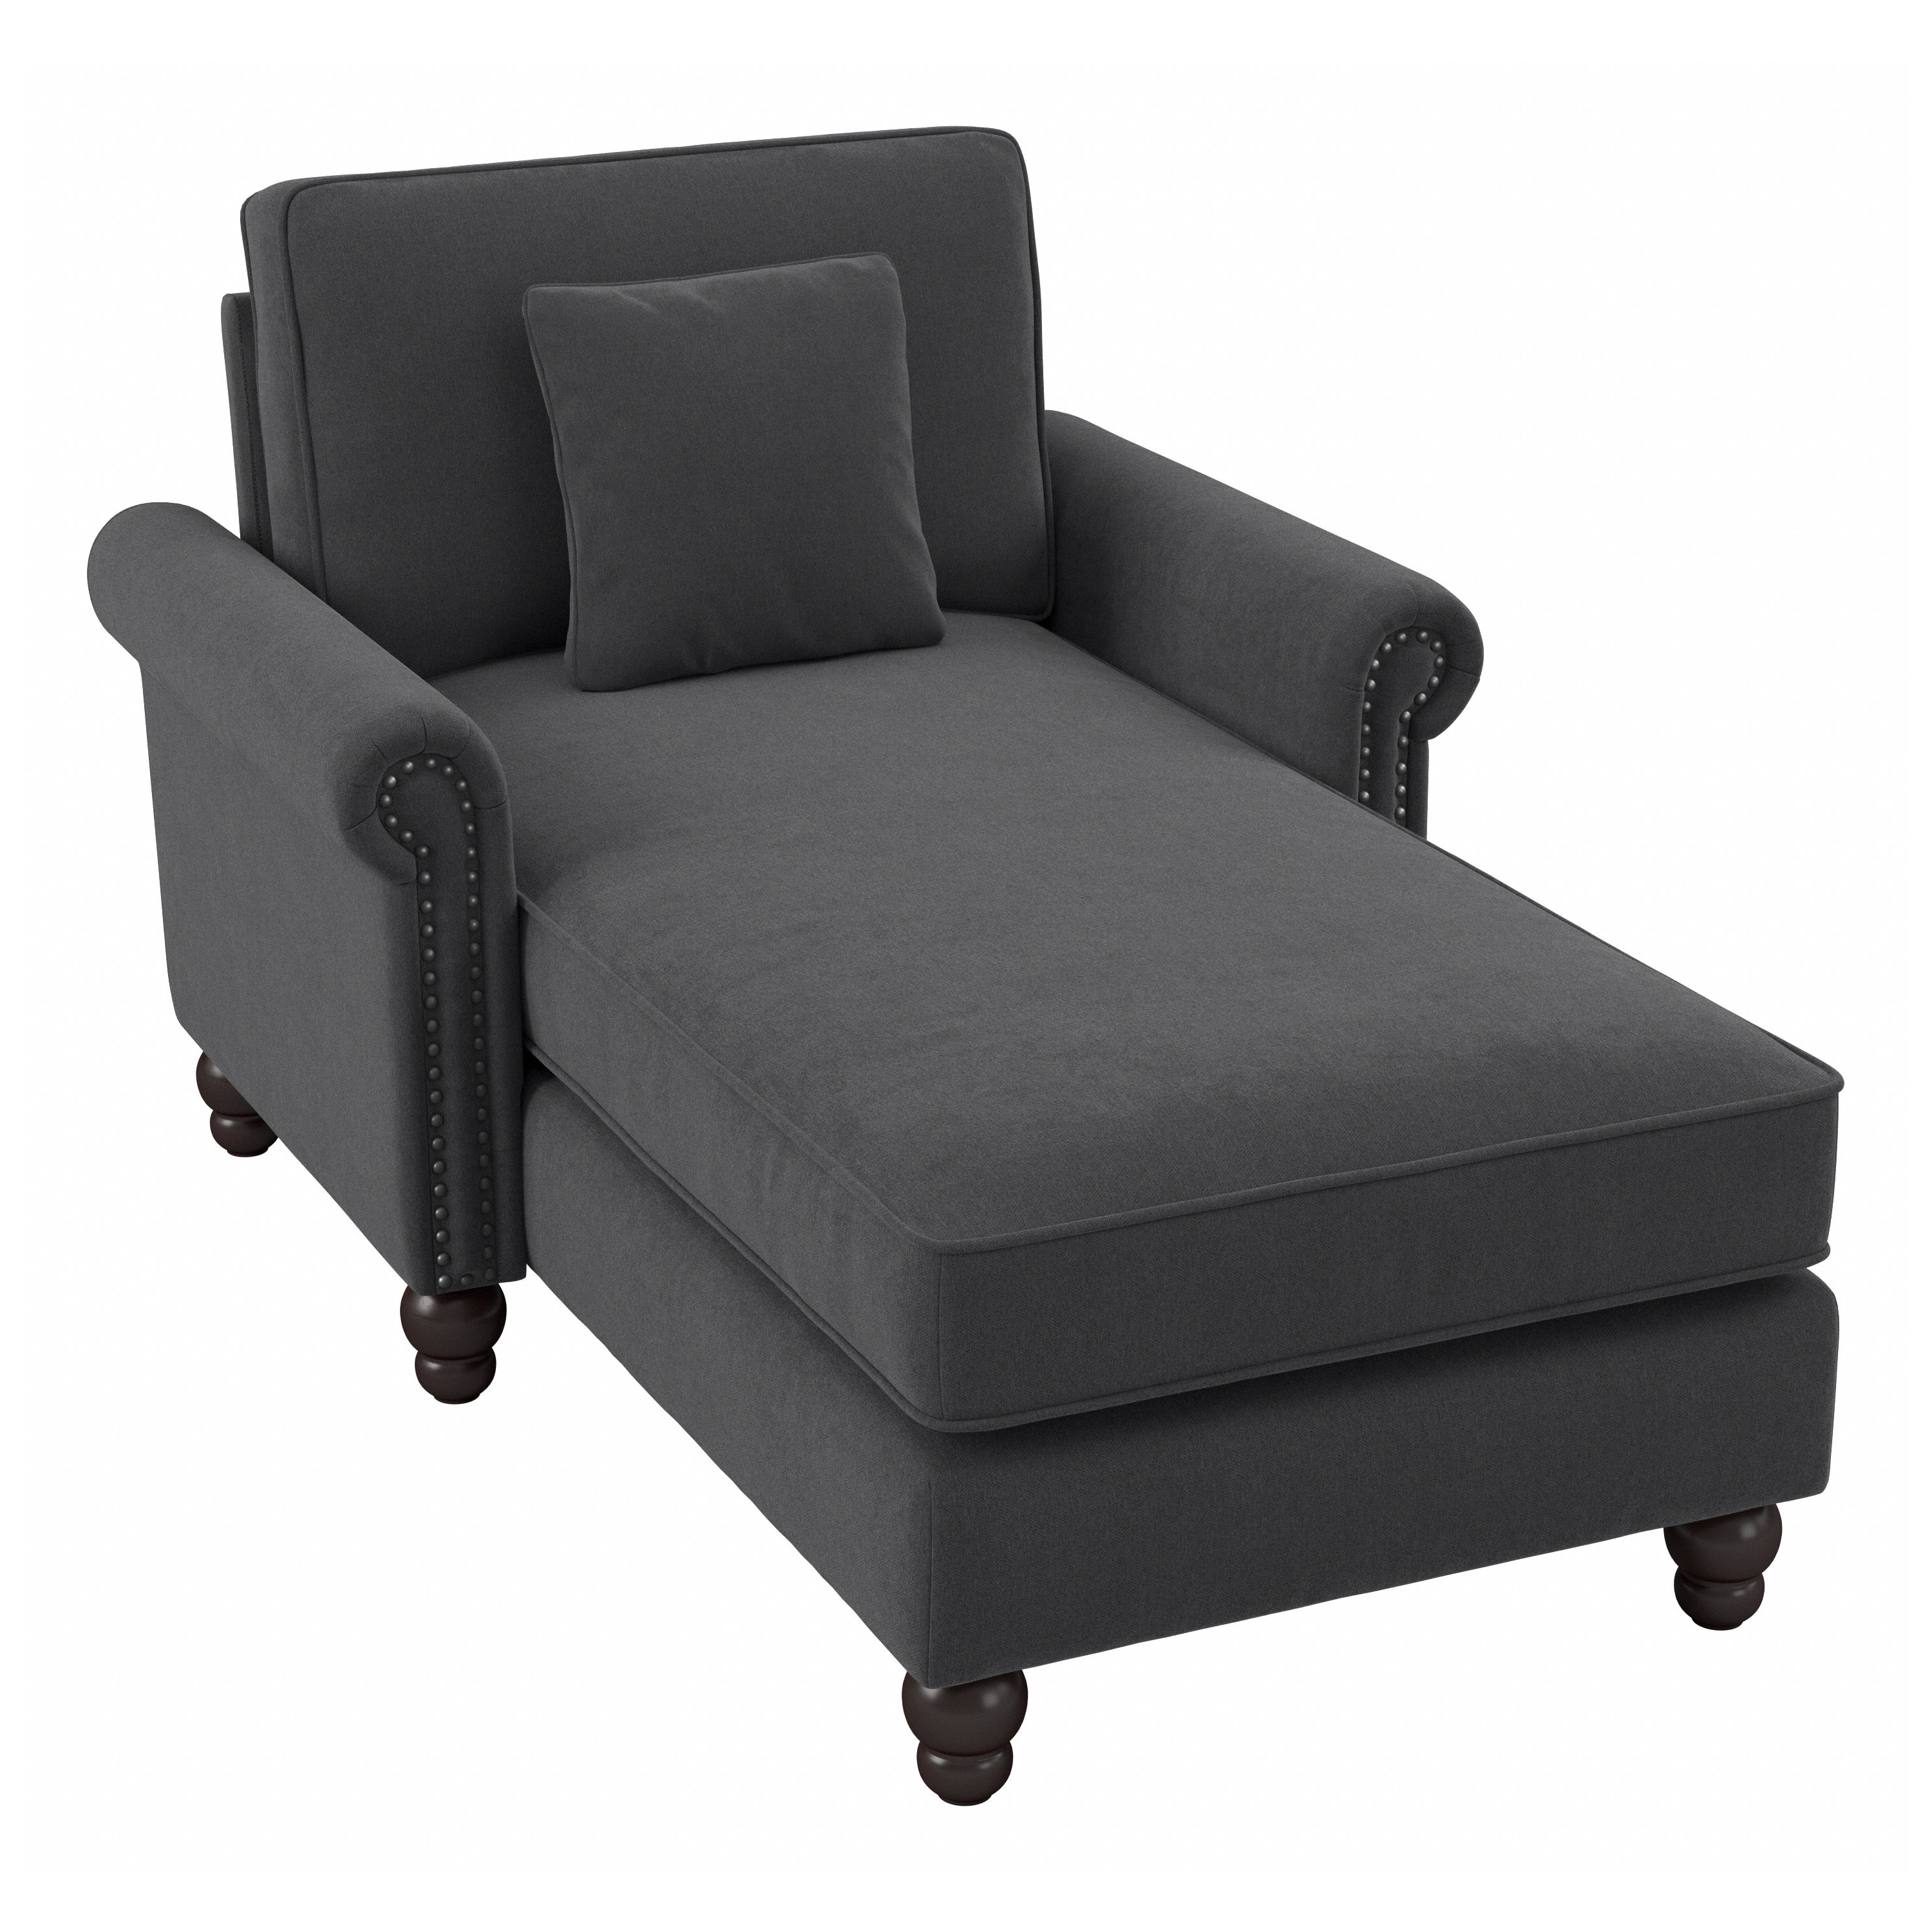 Shop Bush Furniture Coventry Chaise Lounge with Arms 02 CVM41BCGH-03K #color_charcoal gray herringbone fabr